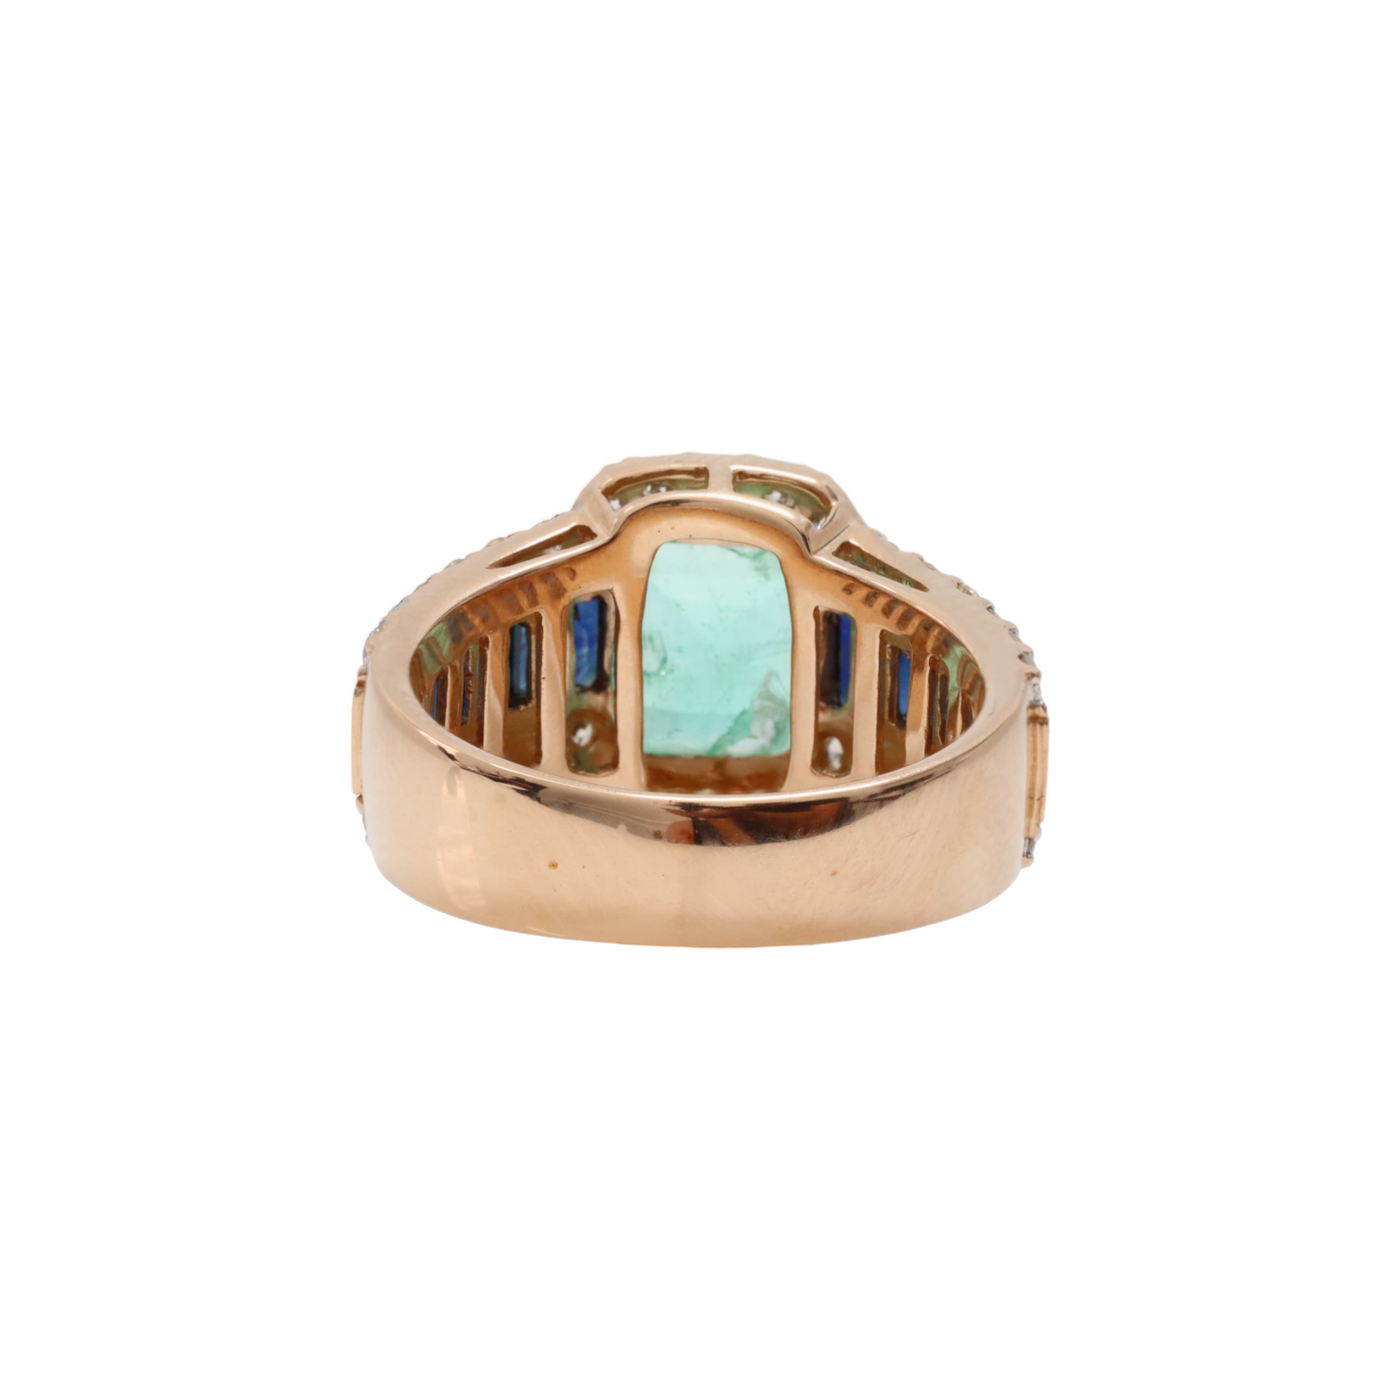 18ct Rose Gold, Colombian Emerald, Sapphires and Diamond ring